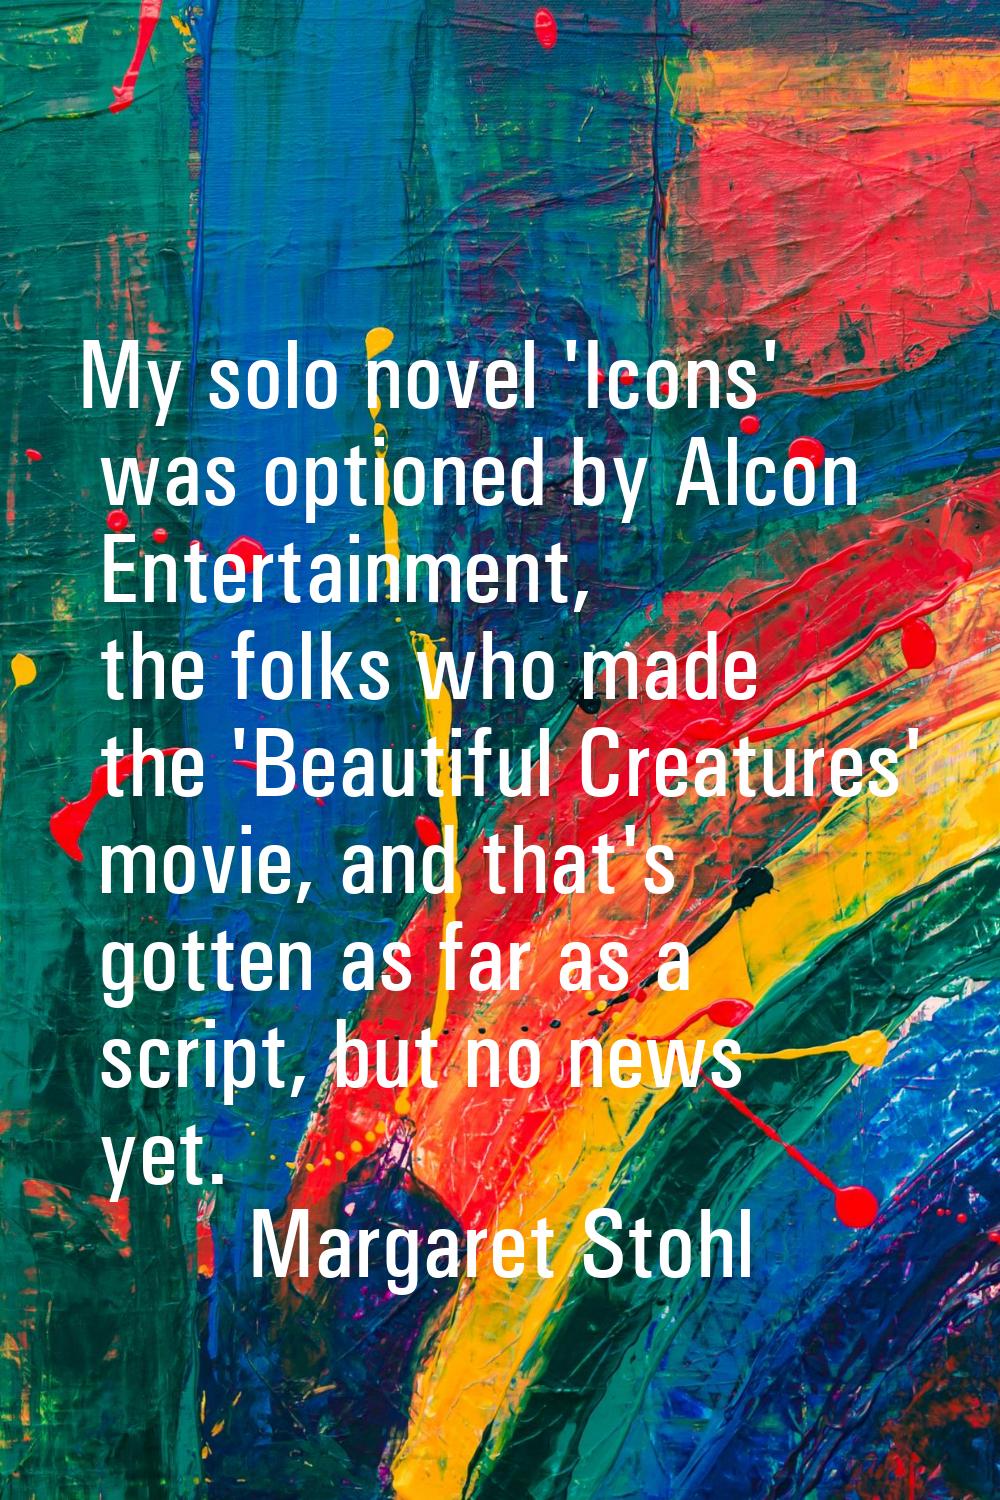 My solo novel 'Icons' was optioned by Alcon Entertainment, the folks who made the 'Beautiful Creatu